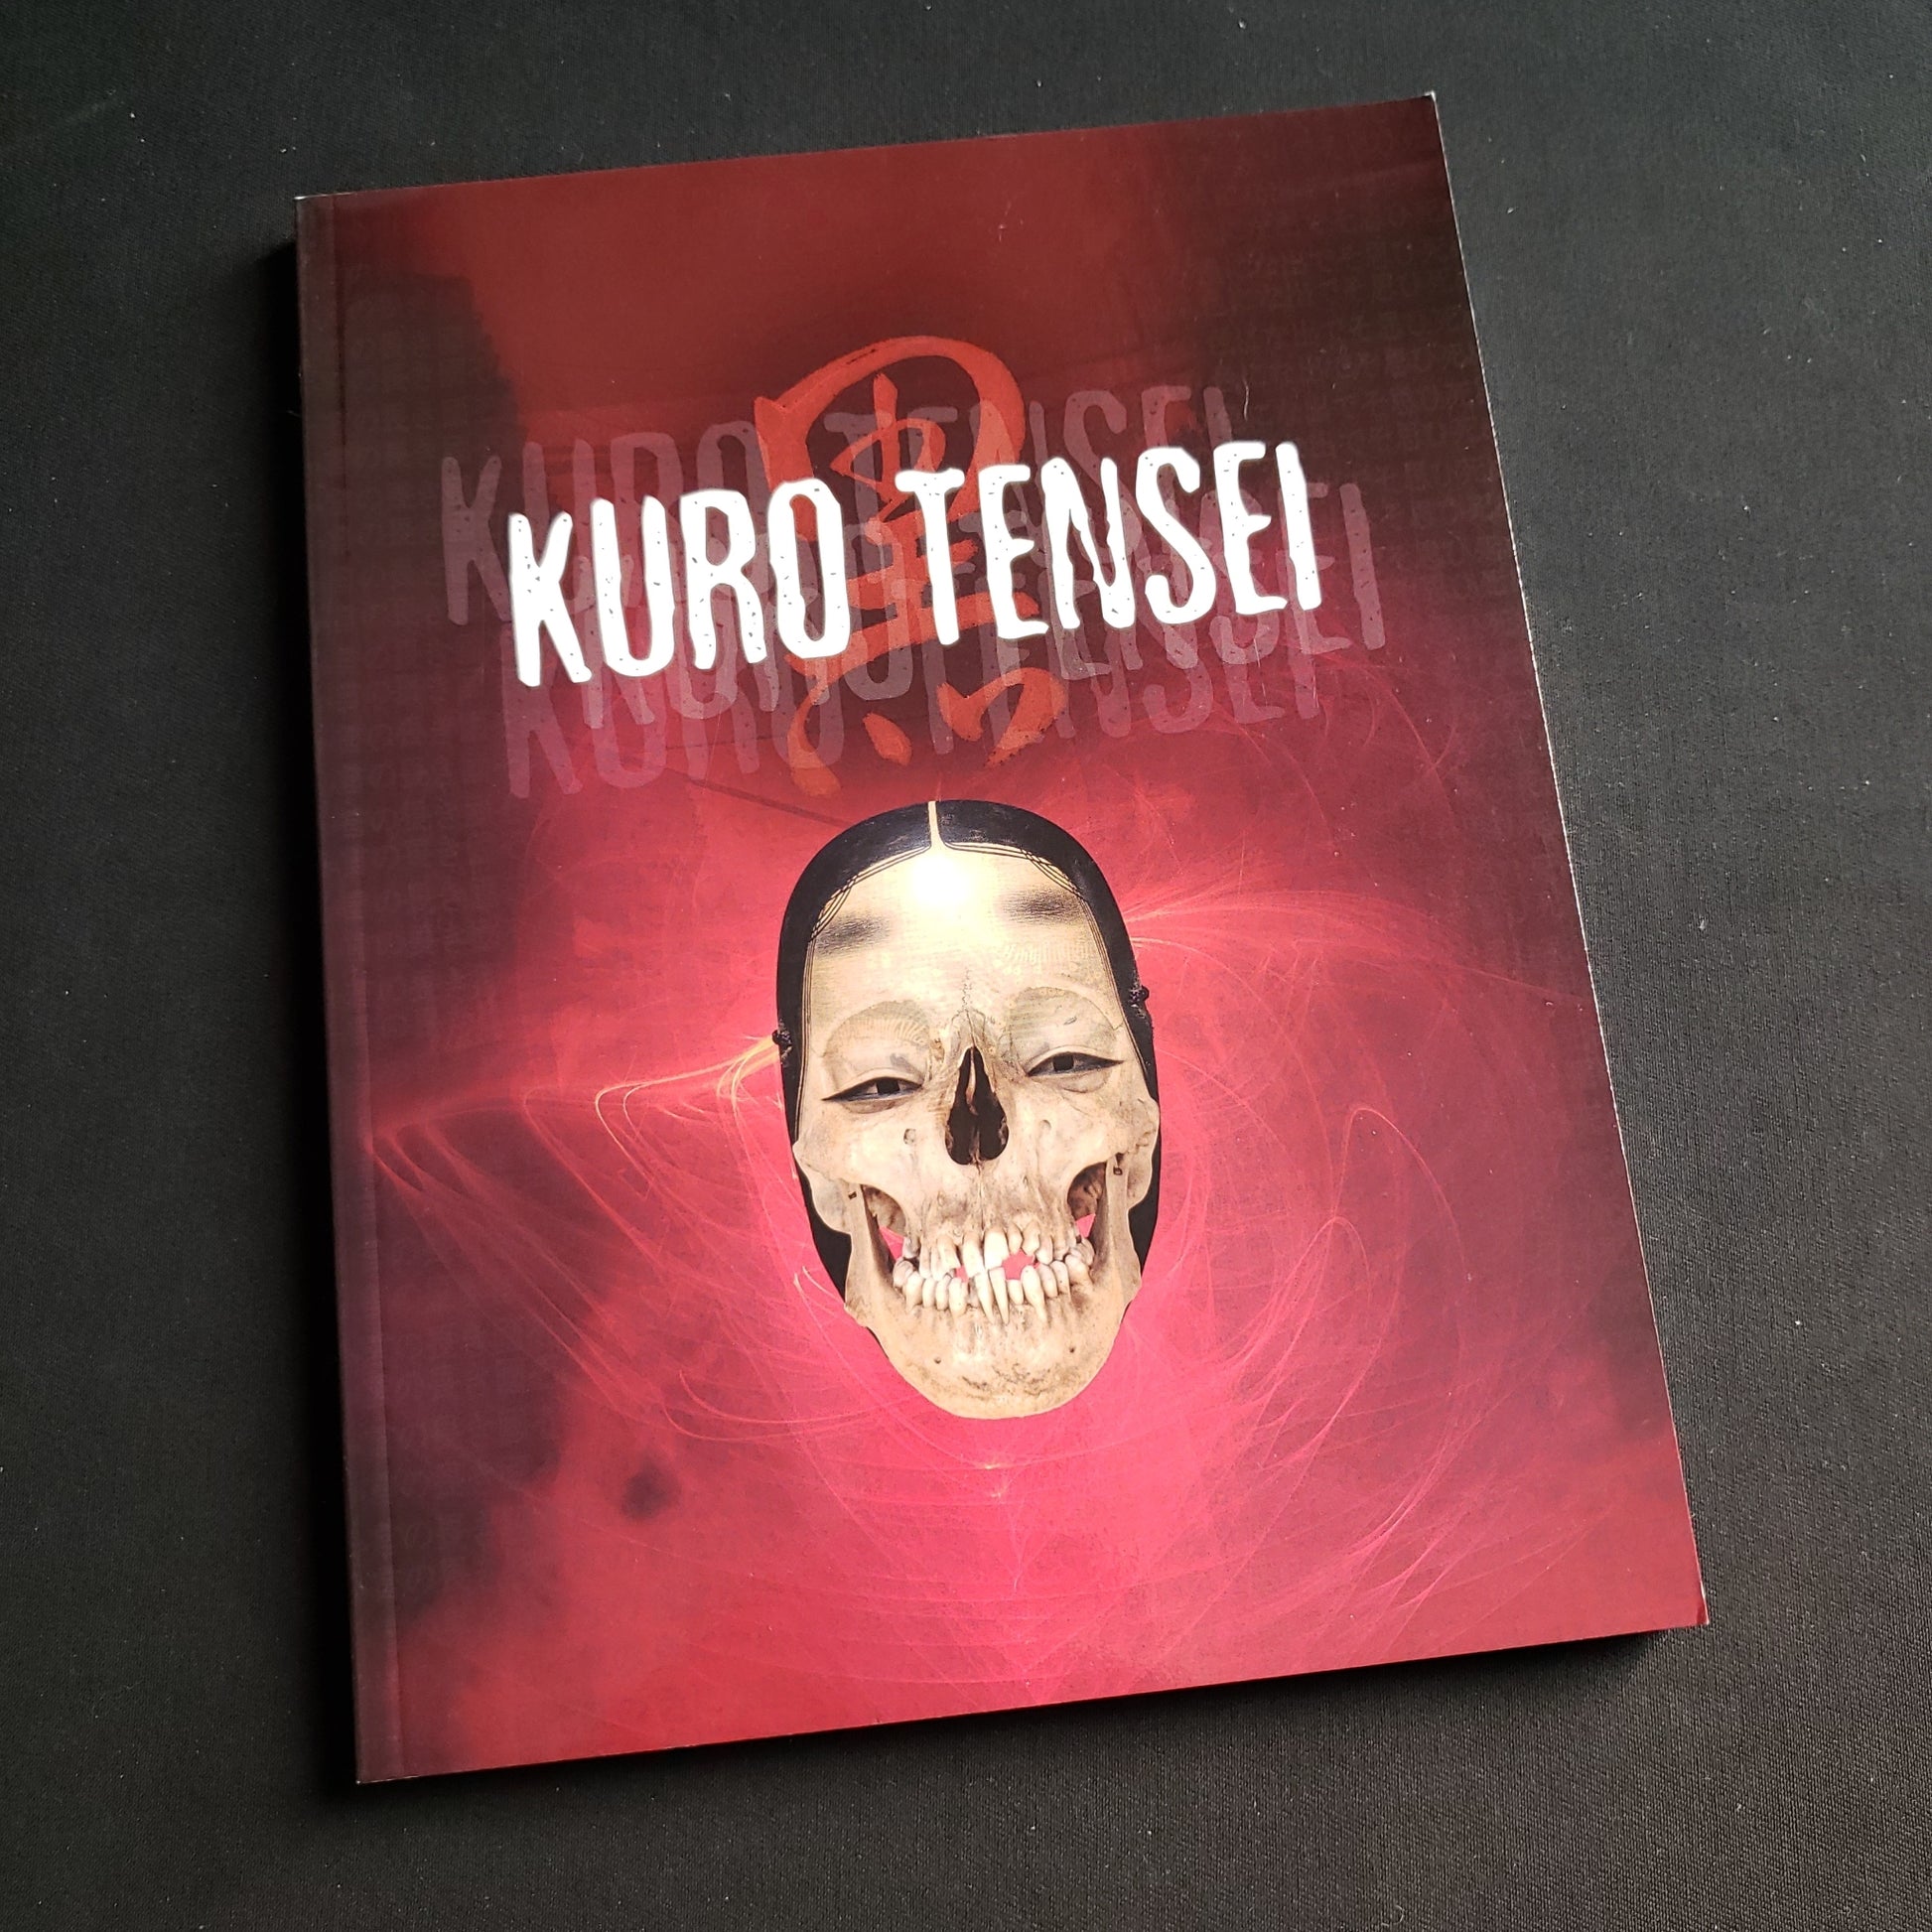 Image shows the front cover of the Kuro Tensei roleplaying game book